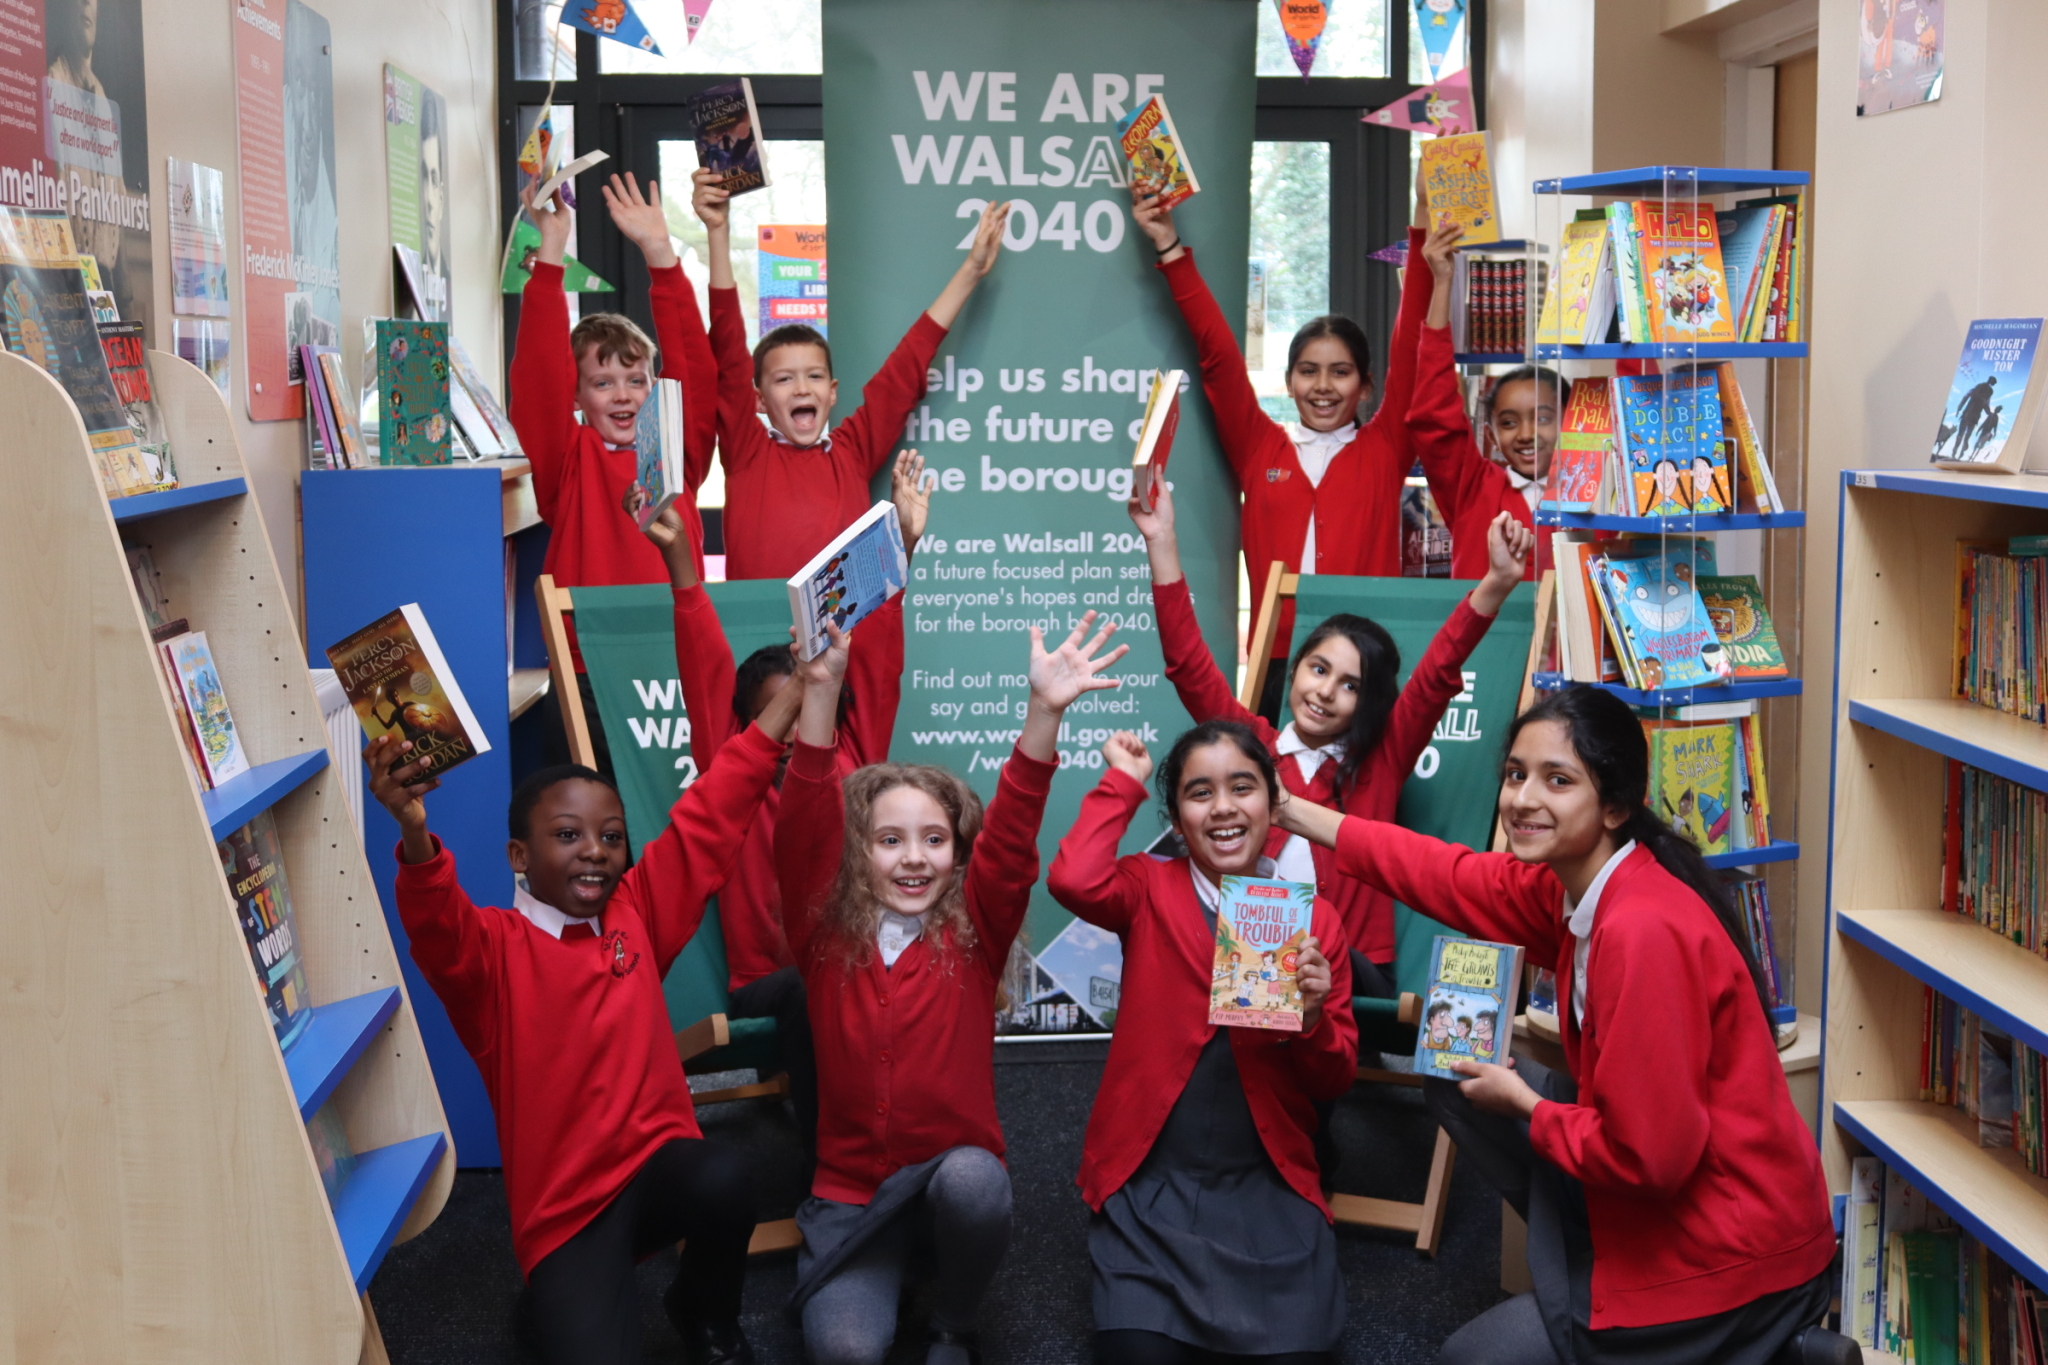 A group of school children in red jumpers sitting in a library holding books and cheering